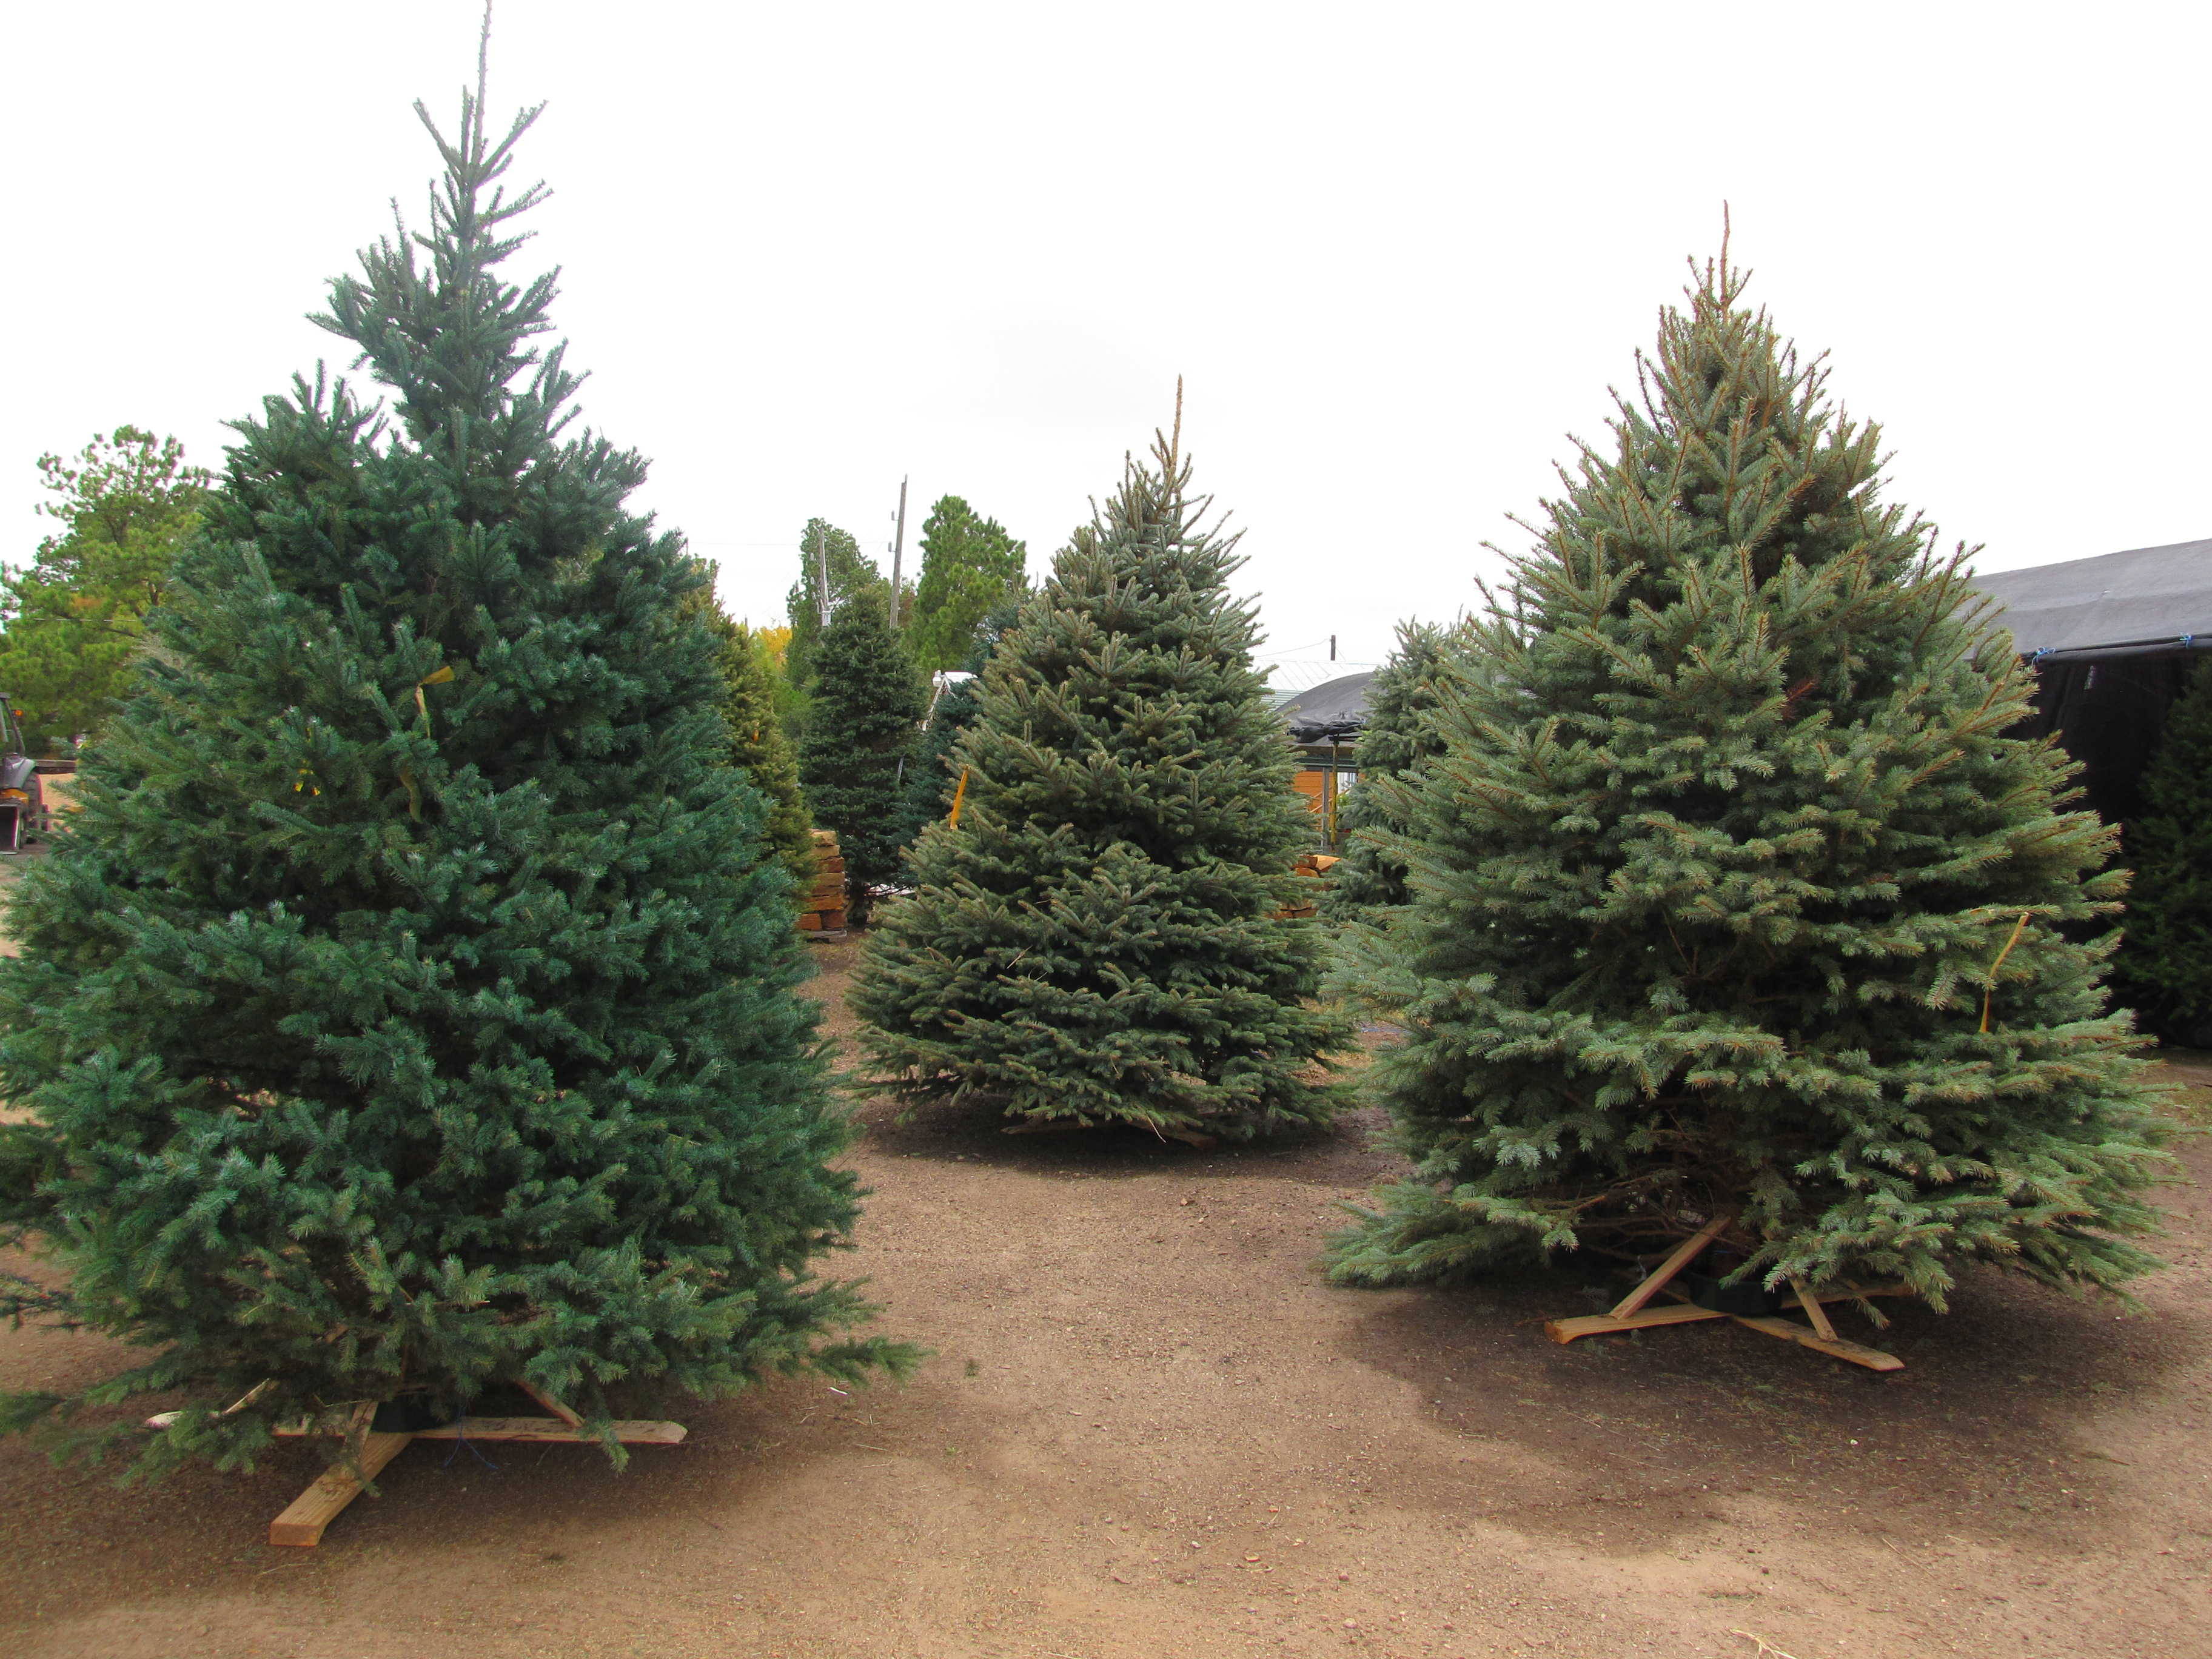 Seasonal Products including Christmas Trees and Fireworks at J&J Nursery, Spring, TX.